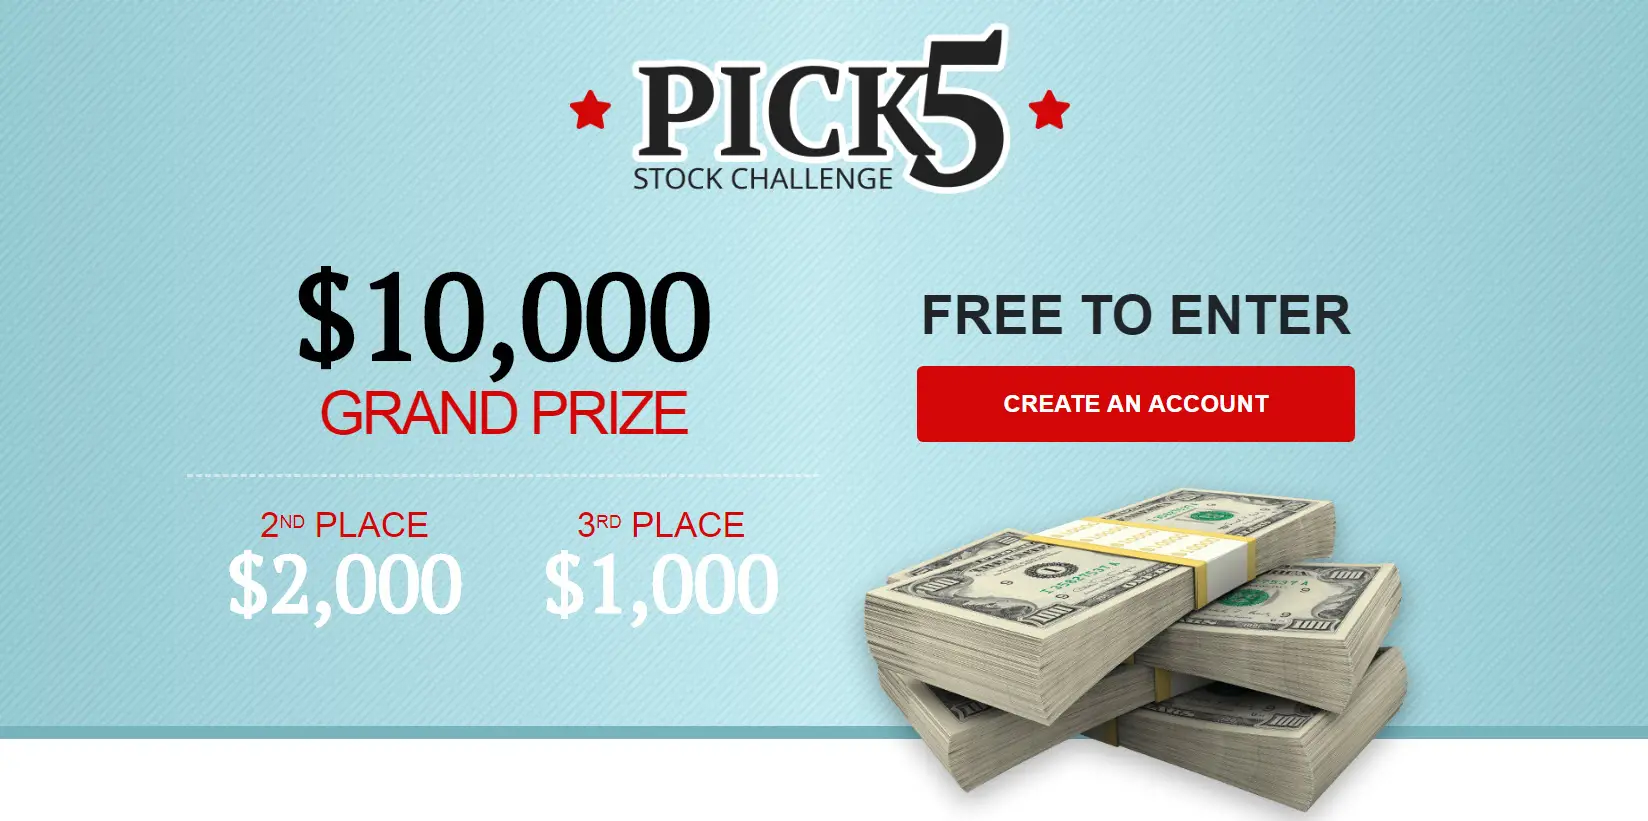 Enter Pick5 Media's Stock Challenge today and you could win Free Cash - $1,000, $2,000 or $10,000! 